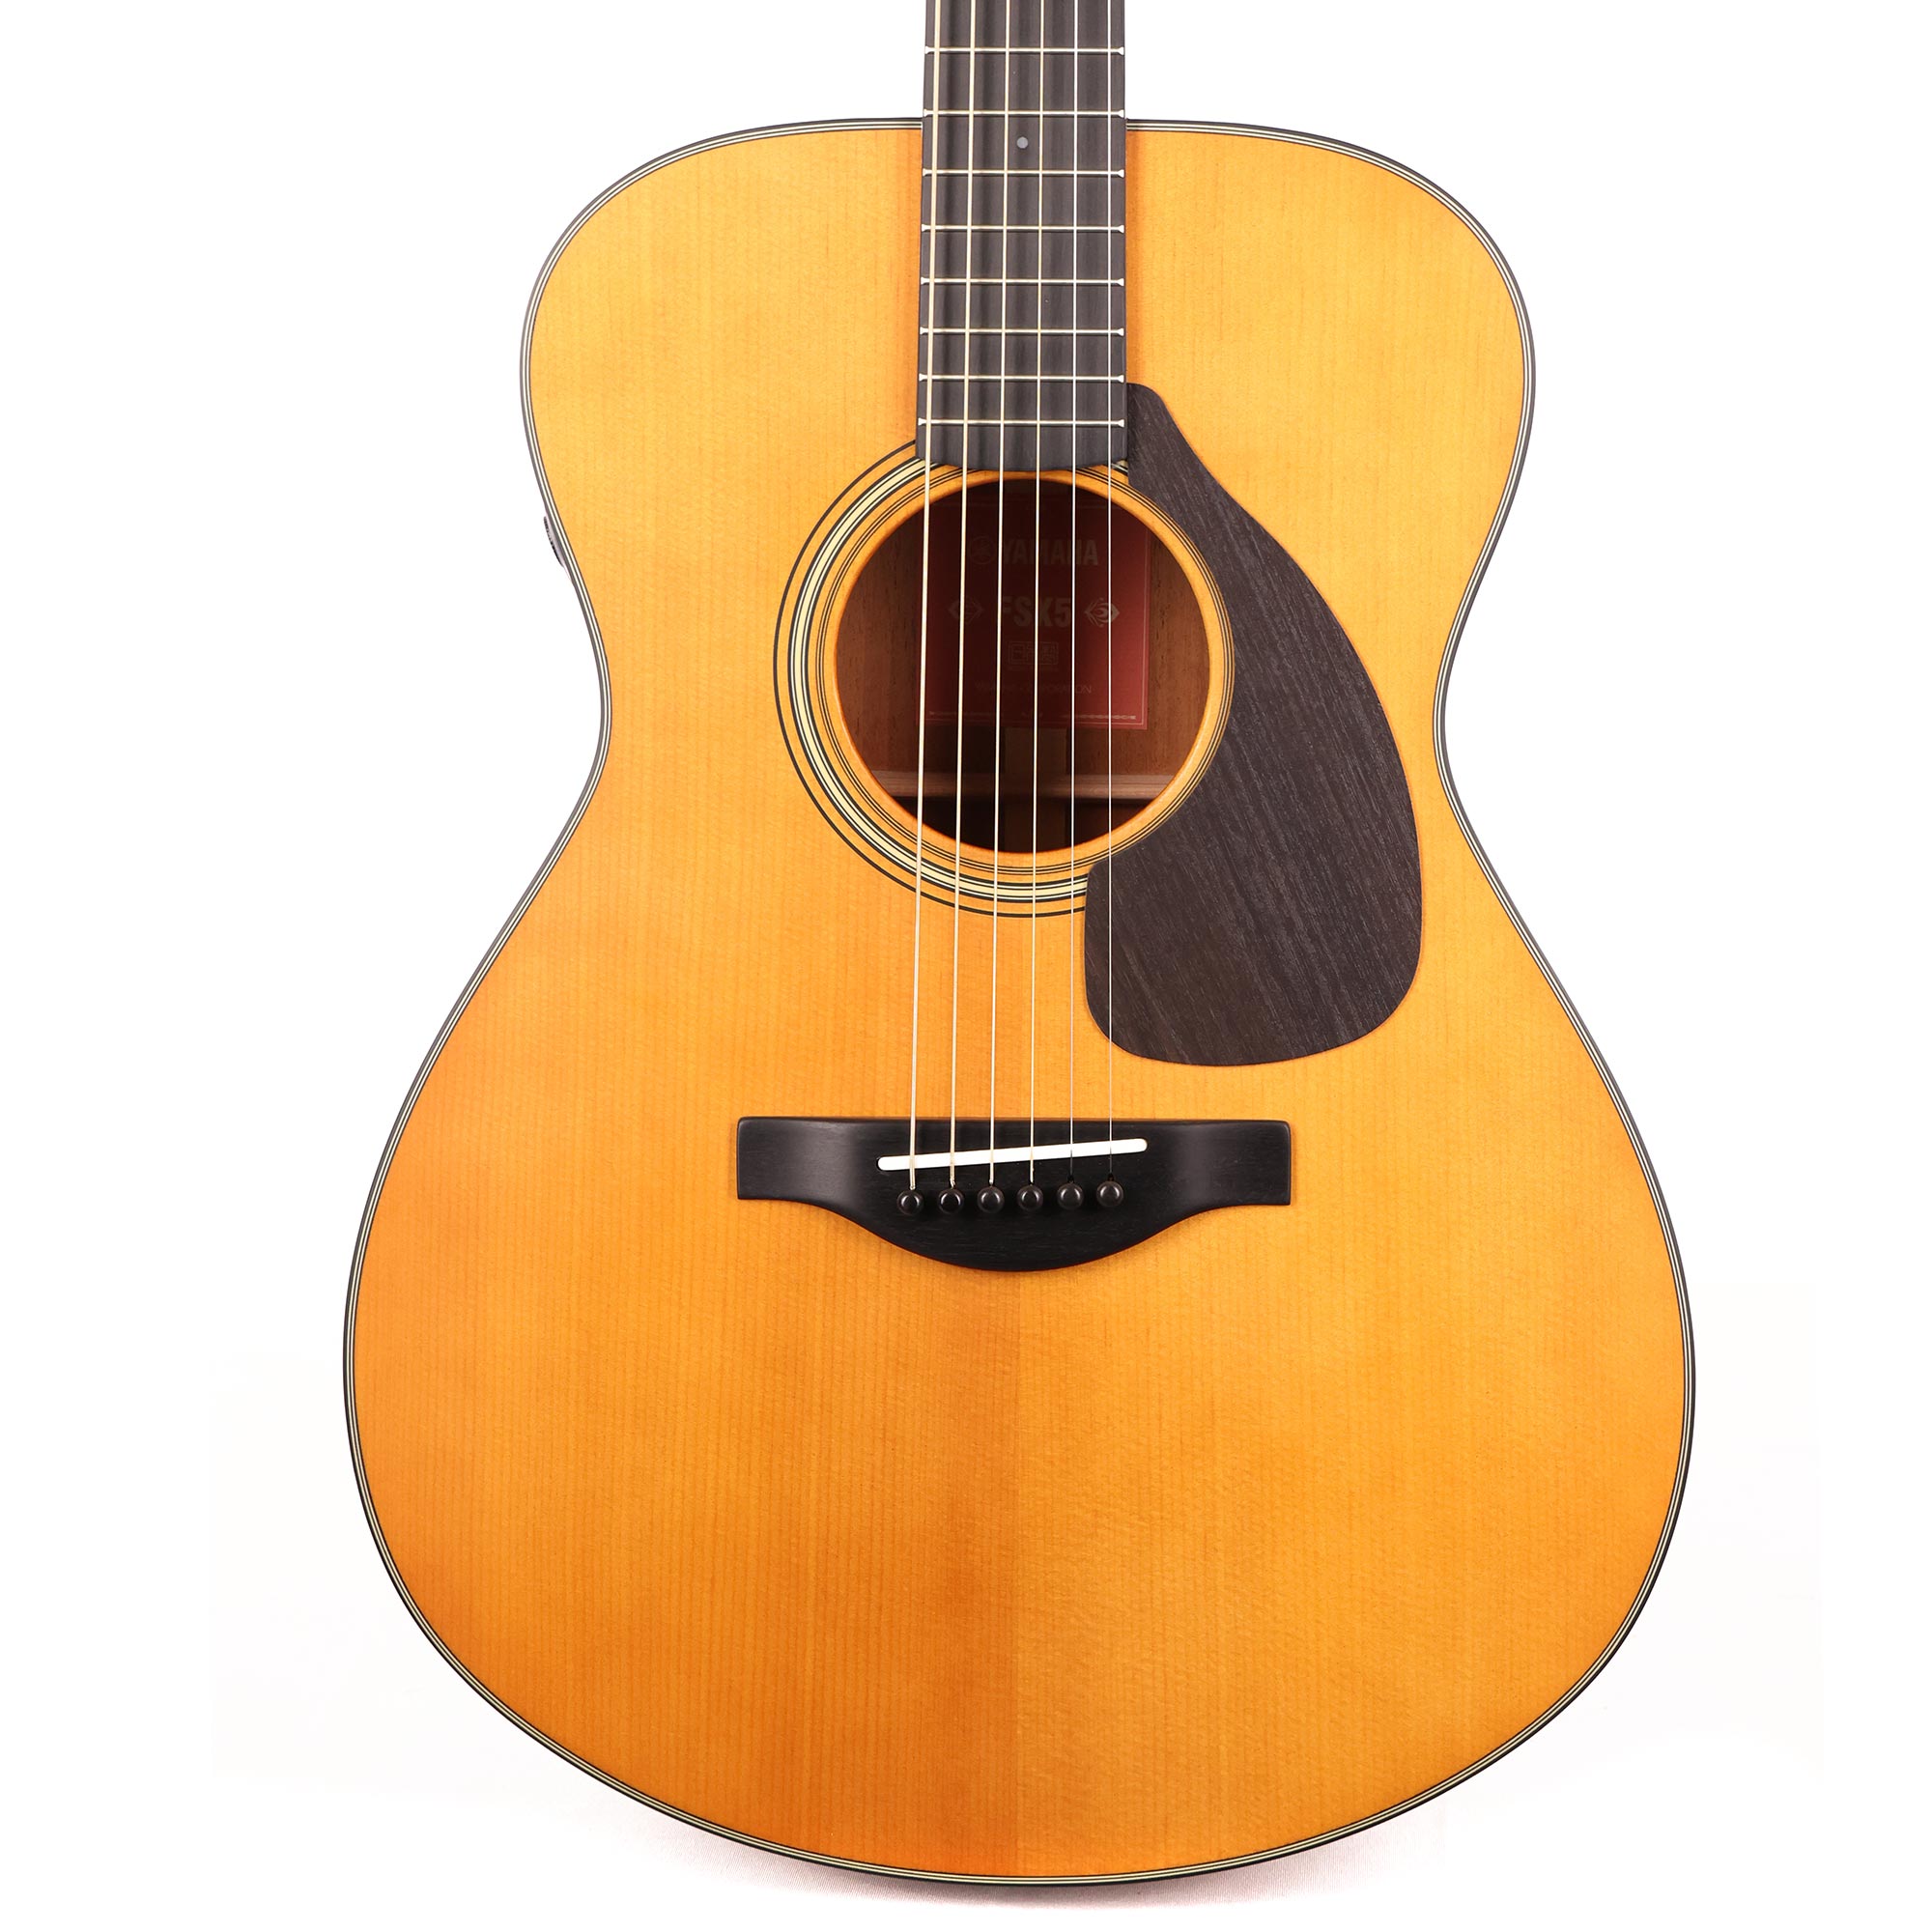 Yamaha Red Label FSX5 Concert Acoustic Guitar Natural | The Music Zoo